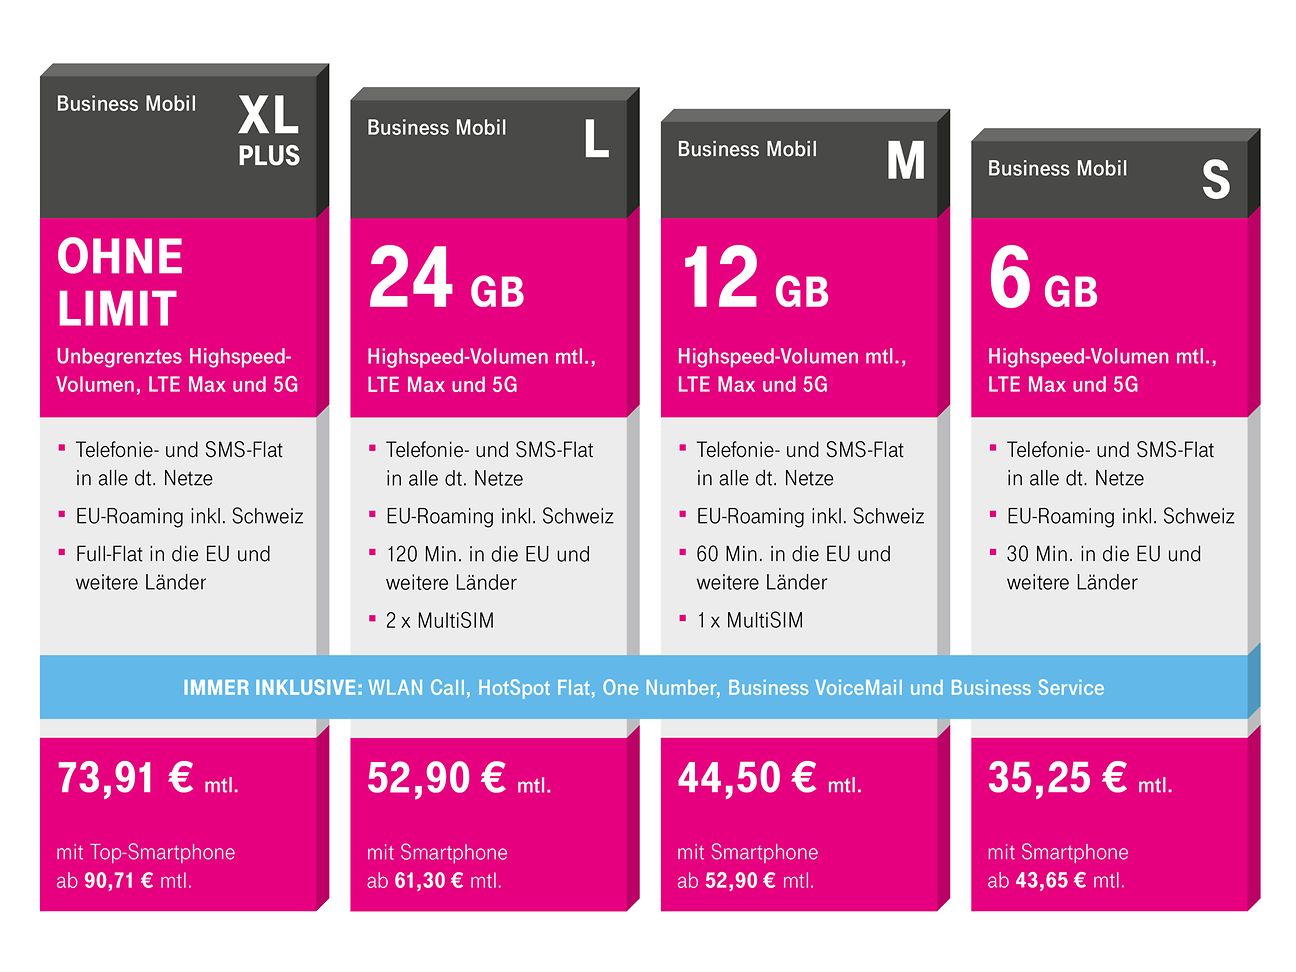 Fit for the future – new Business Mobil plans with bigger data allowances  and 5G | Deutsche Telekom